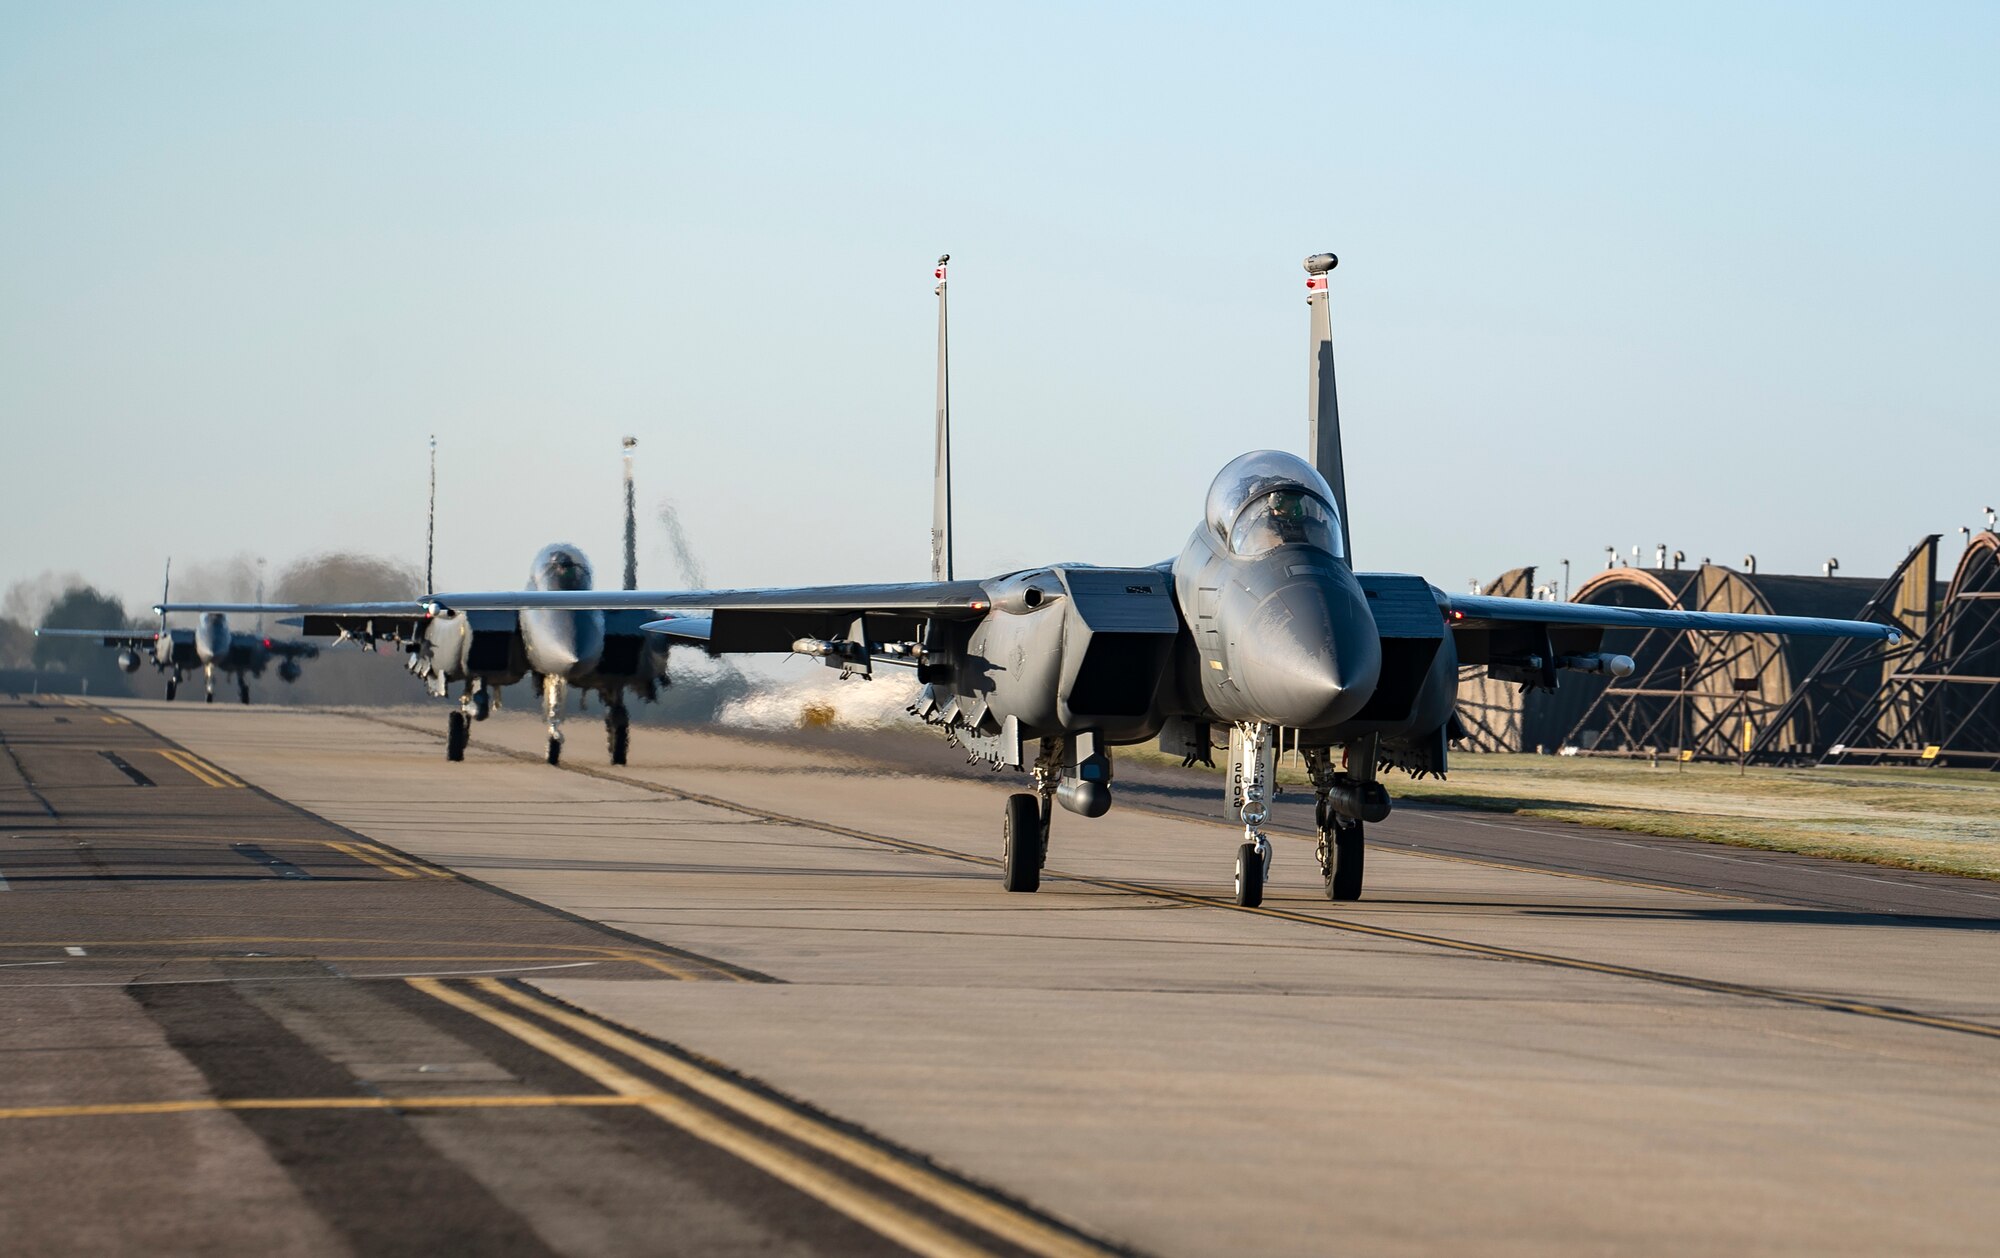 F-15E Strike Eagles taxi to the runway for the first wave of orientation flights at Royal Air Force Lakenheath, England, Feb. 26, 2021. Orientation flights are offered to those who have responsibilities related to aviation and aircraft or as an award to individuals who show exceptional performance in their duties. (U.S. Air Force photo by Airman 1st Class Jessi Monte)